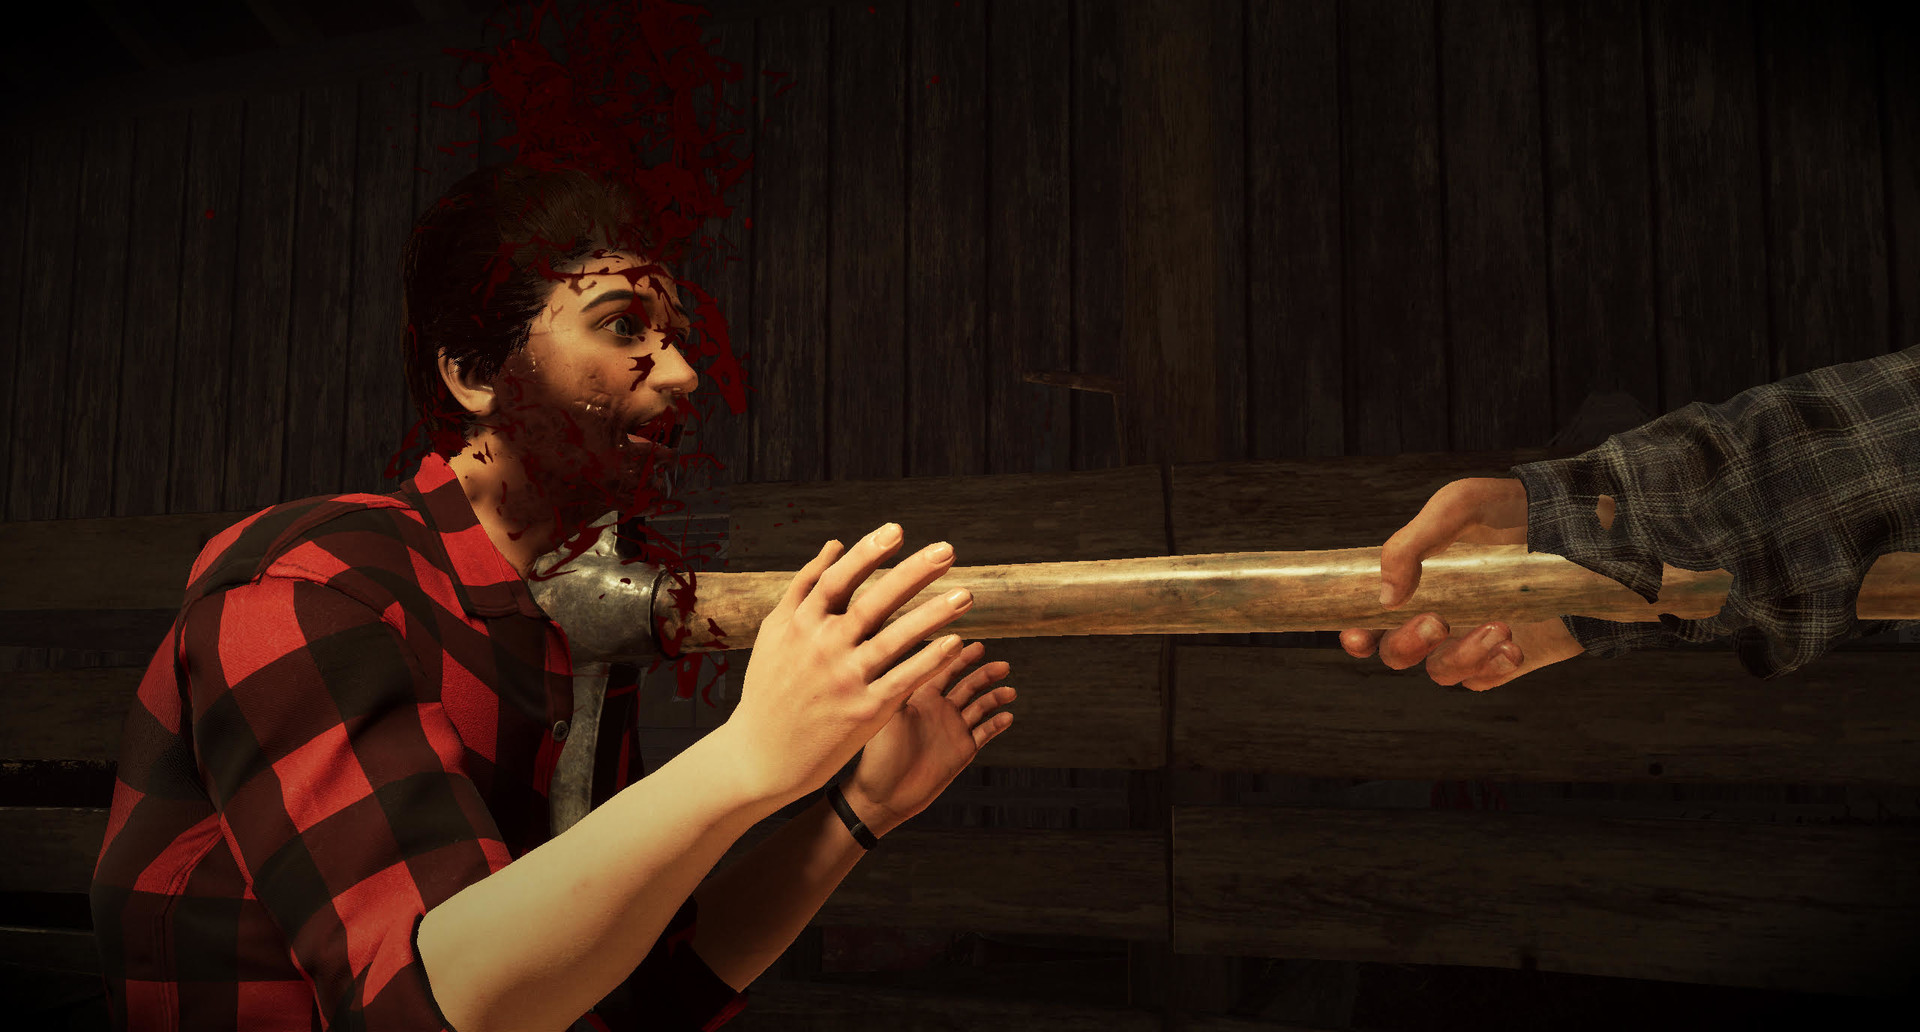 Friday the 13th: The Game - Jason Part 2 Pick Axe Kill Pack Featured Screenshot #1